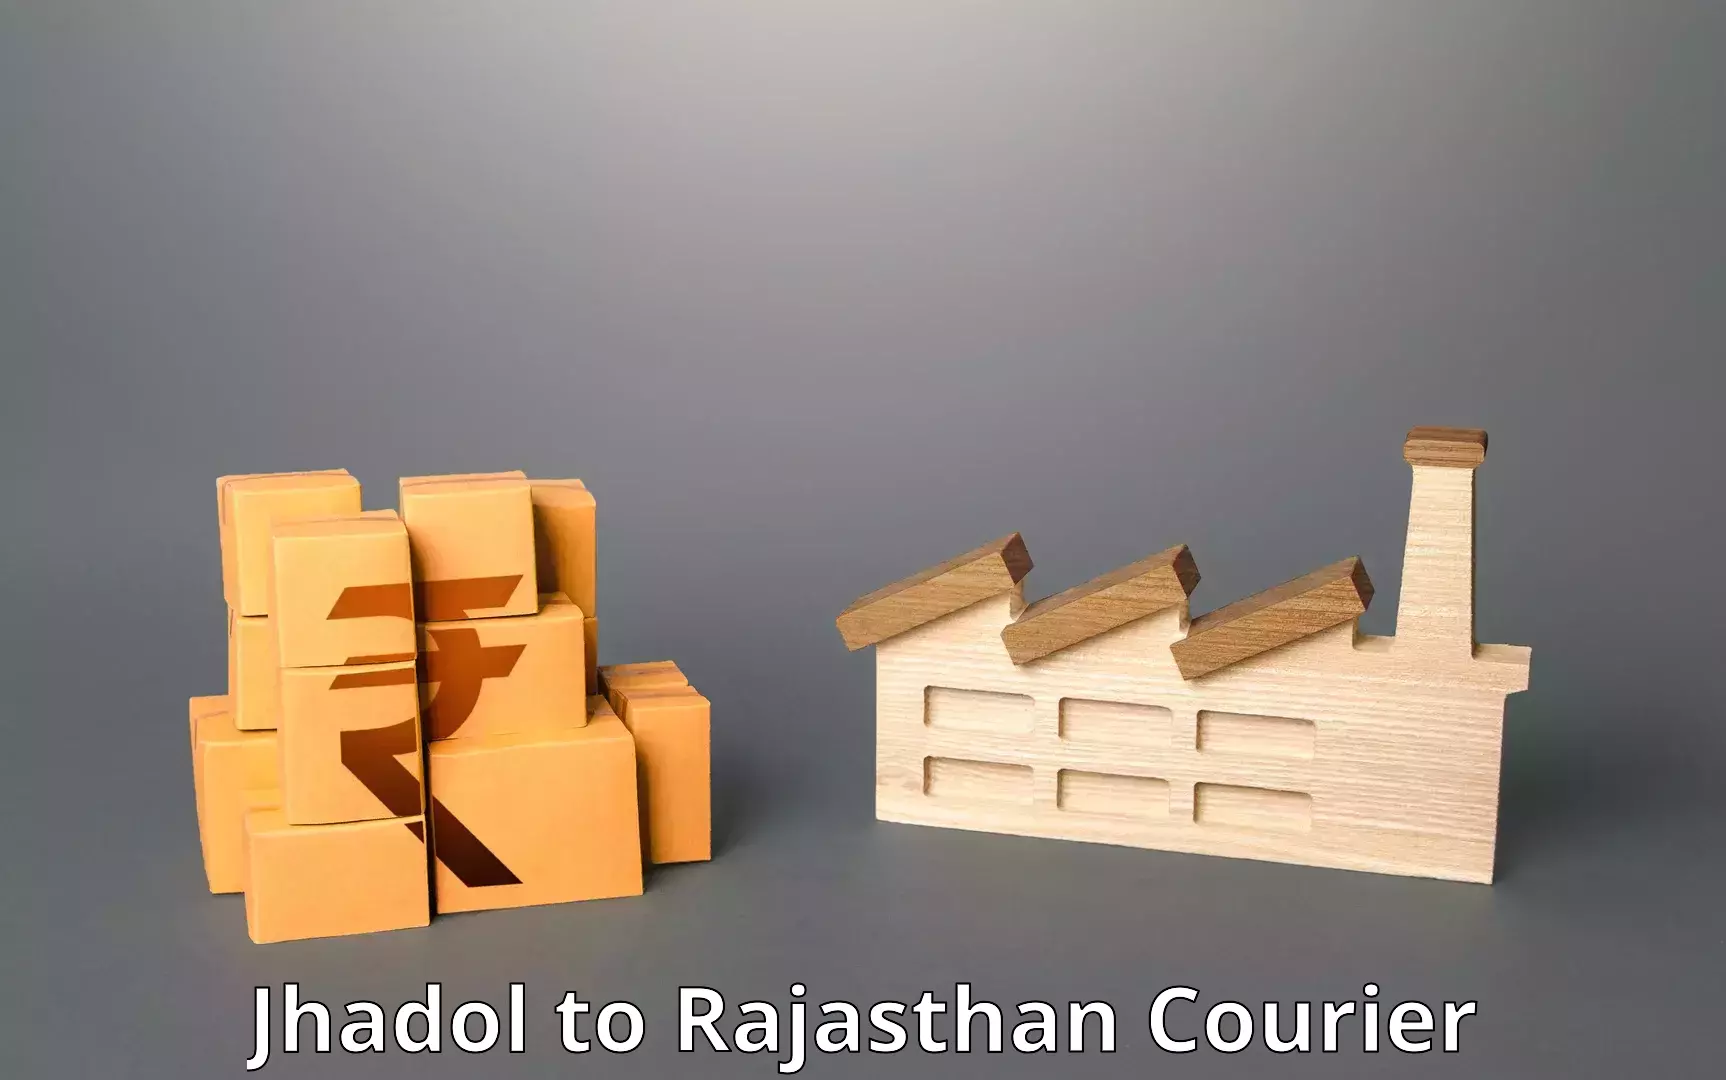 State-of-the-art courier technology Jhadol to Bikaner